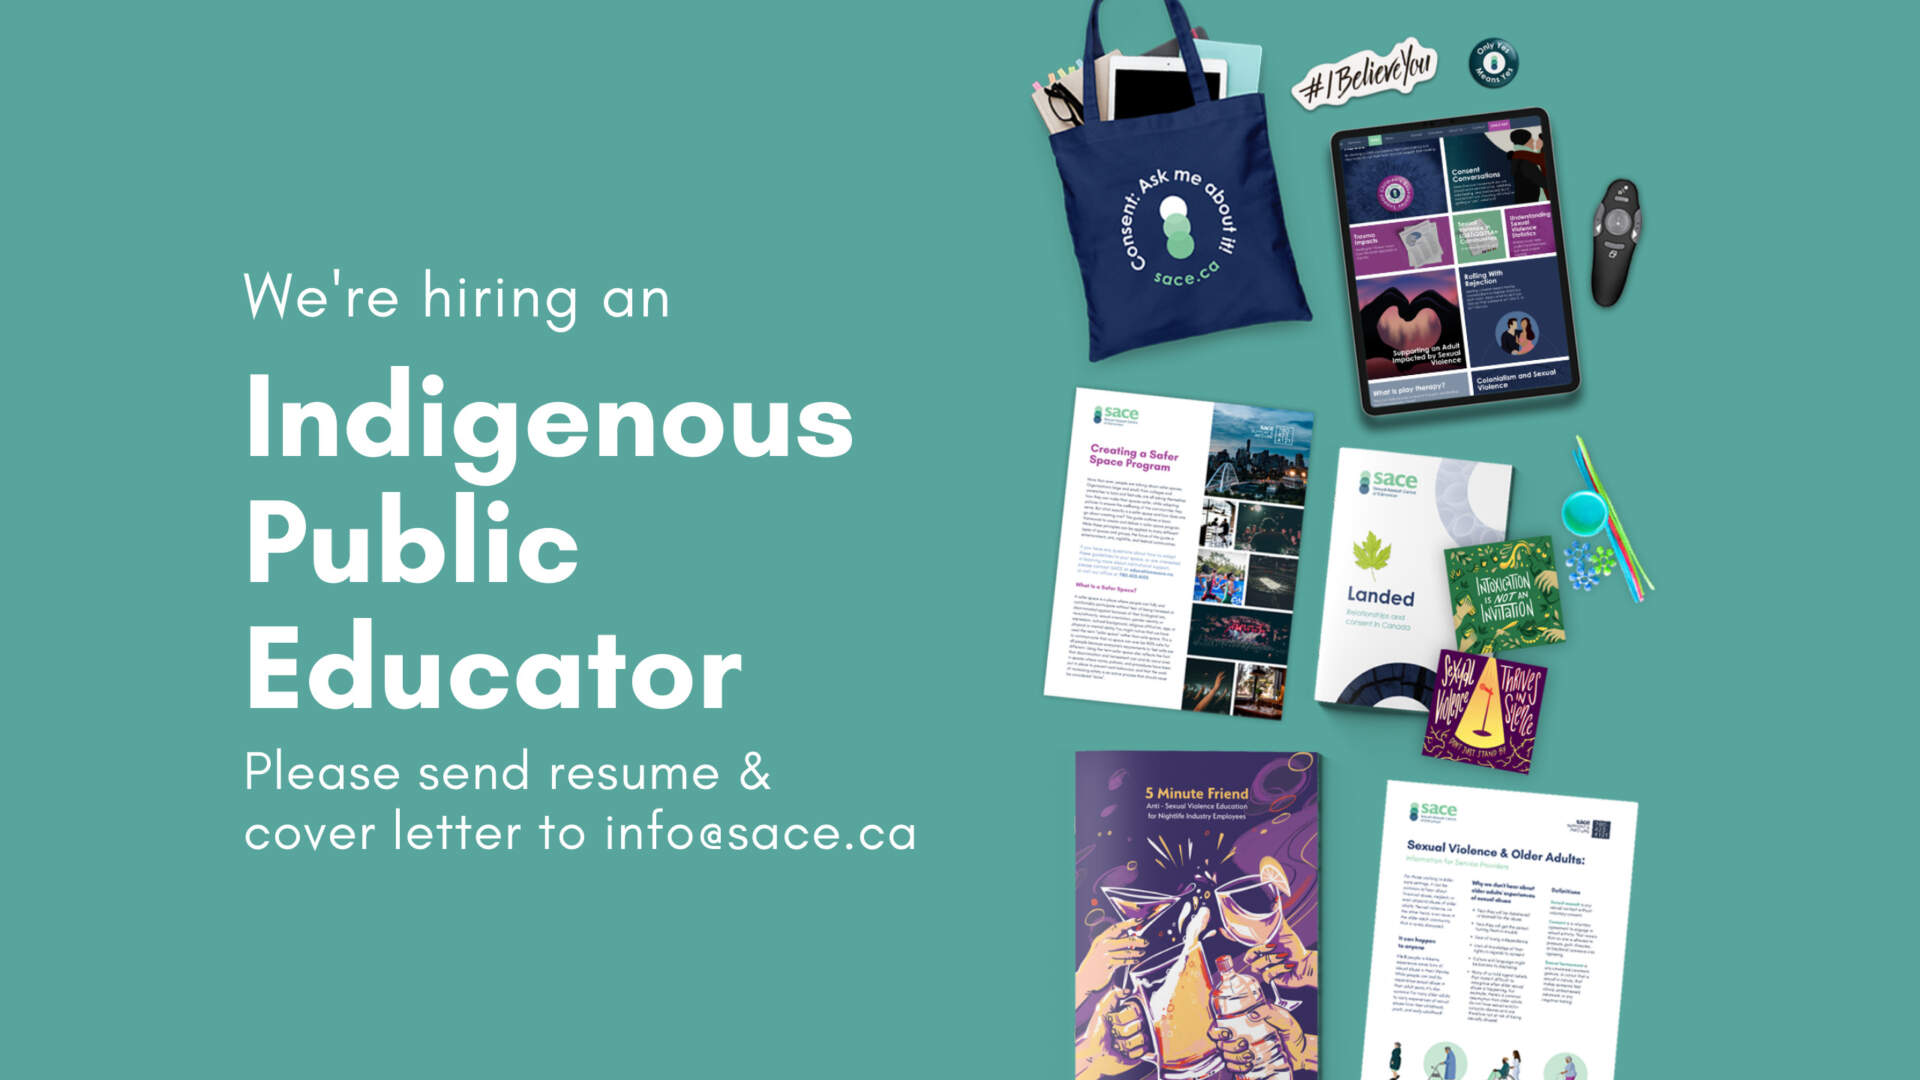 Mint green background with SACE resources, SACE tote bag, Landed booklet, coasters, 5 Minute Friend booklet with text that reads "We're hiring an Indigenous Public Educator" and "Please send resume & cover letter to info@sace.ca"